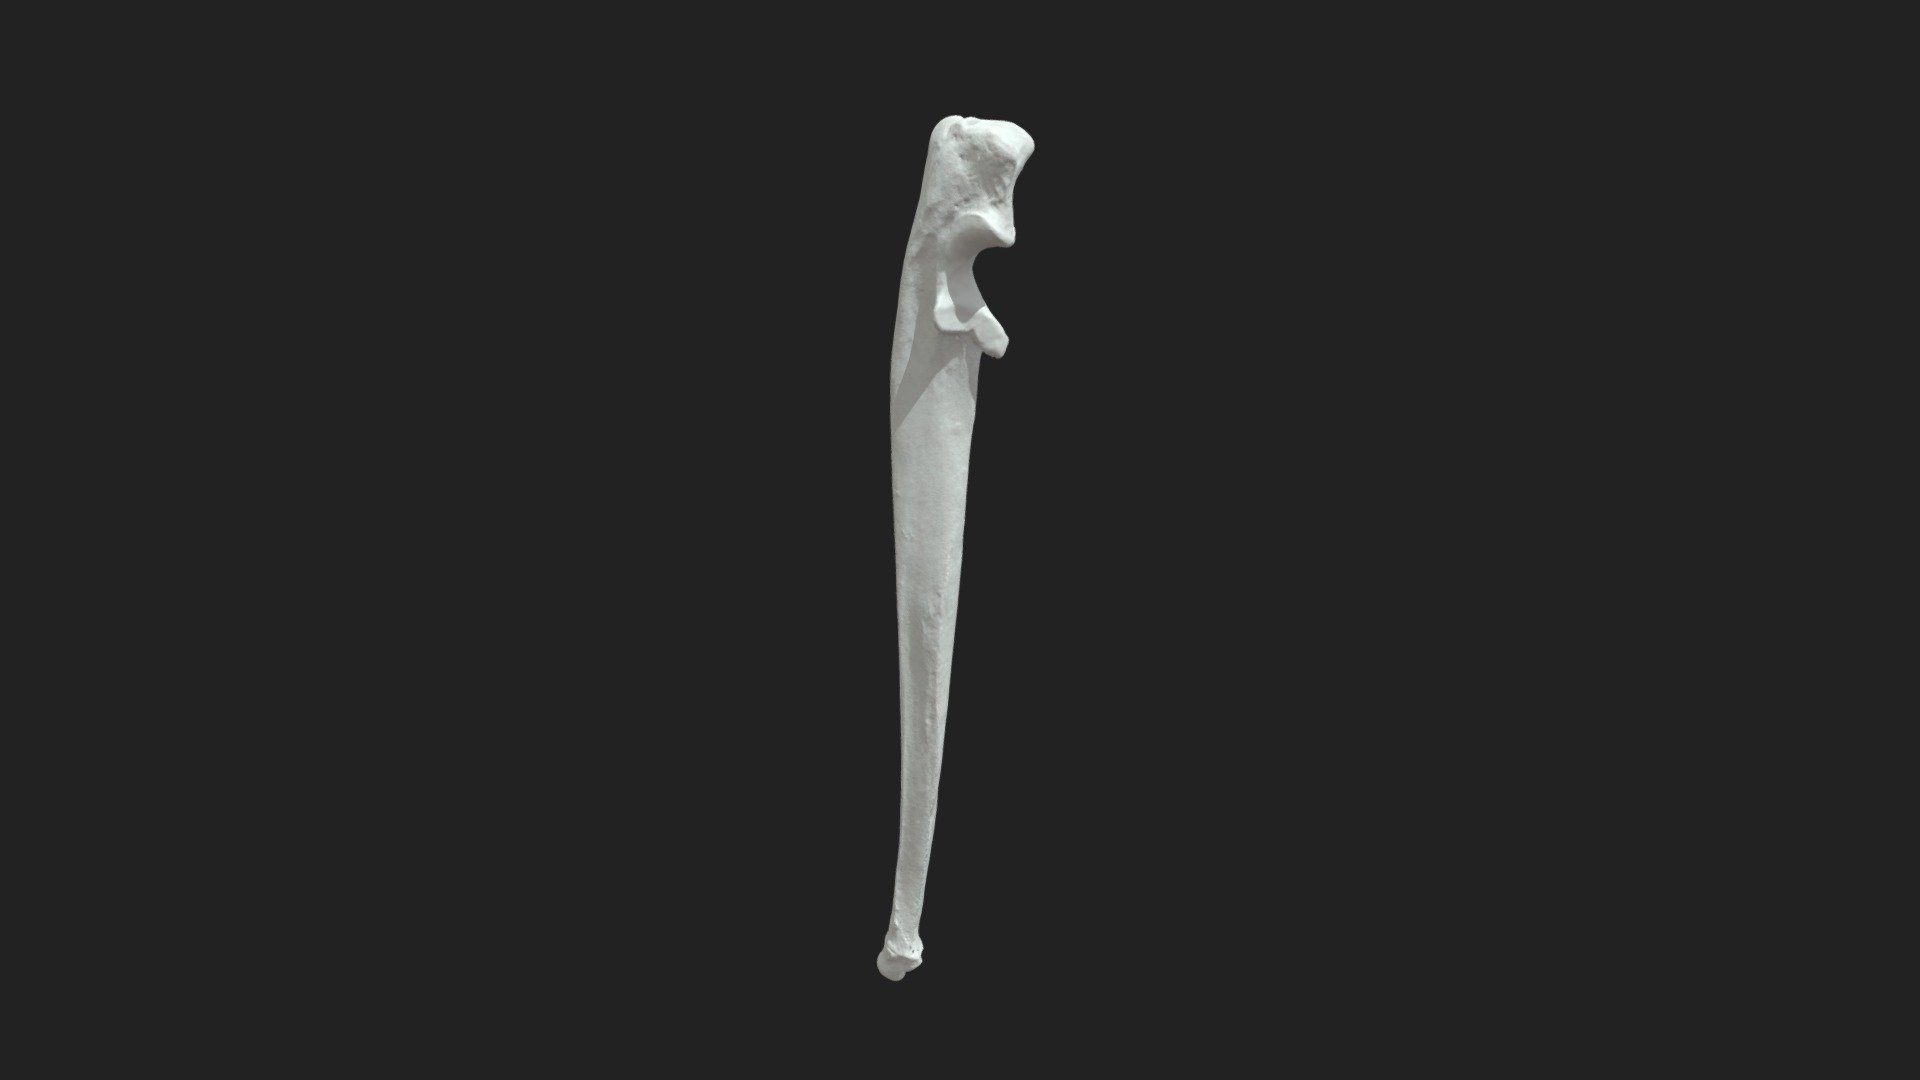 right ulna (ulna) of a cat

size of the specimen: 91 x 9 x 7 mm

3D scanning performed with the structured light scanner “Artec Space Spider” - ulna (ulna) cat - 3D model by vetanatMunich 3d model